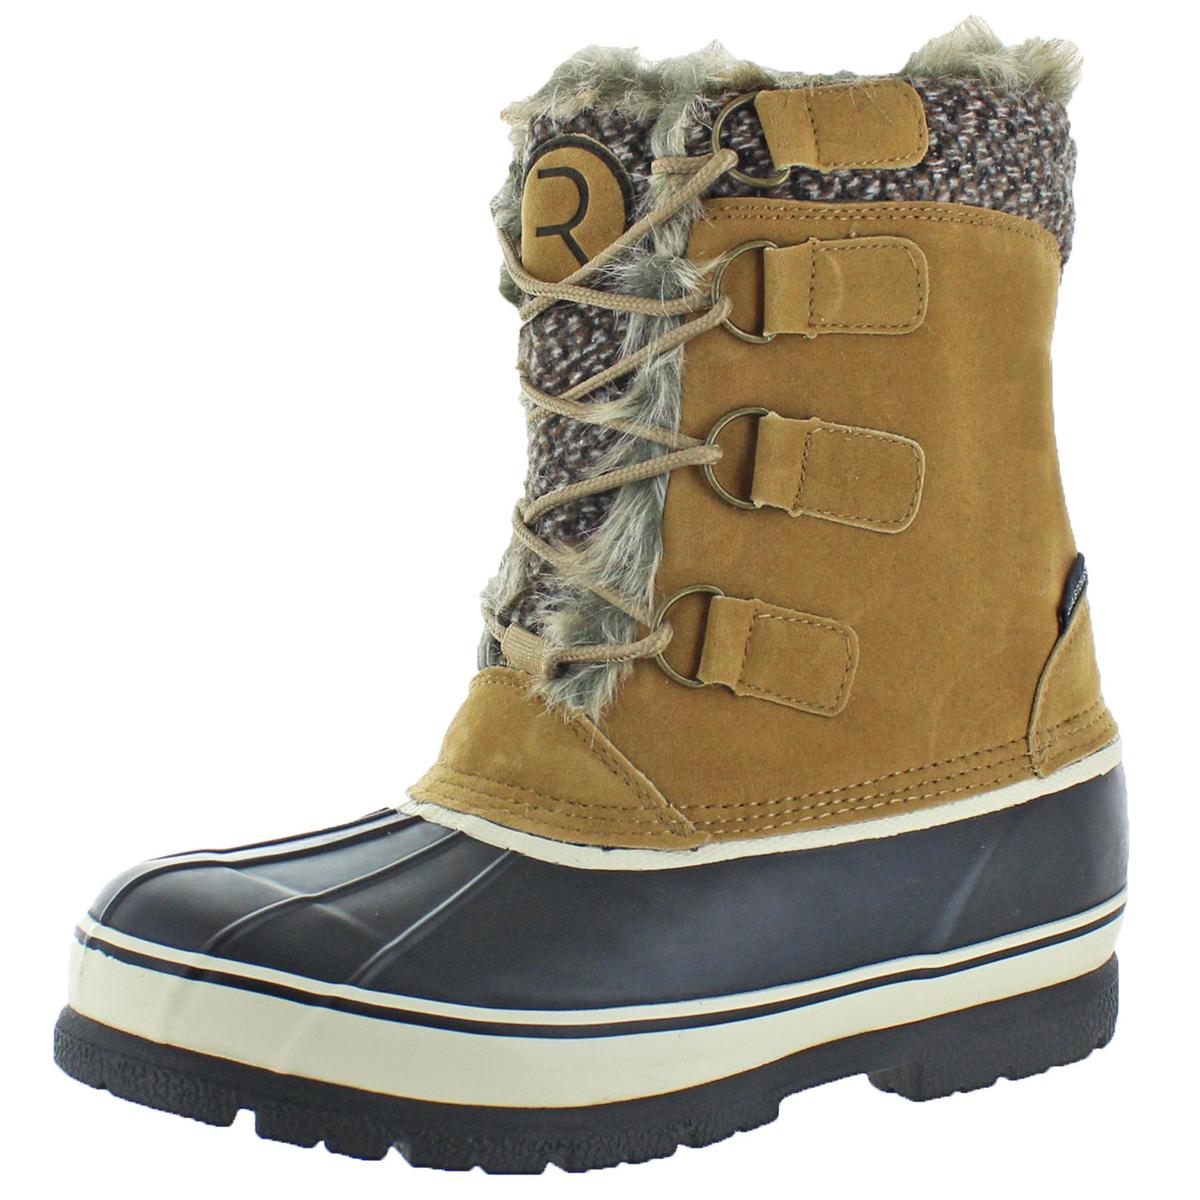 mens rubber winter boots